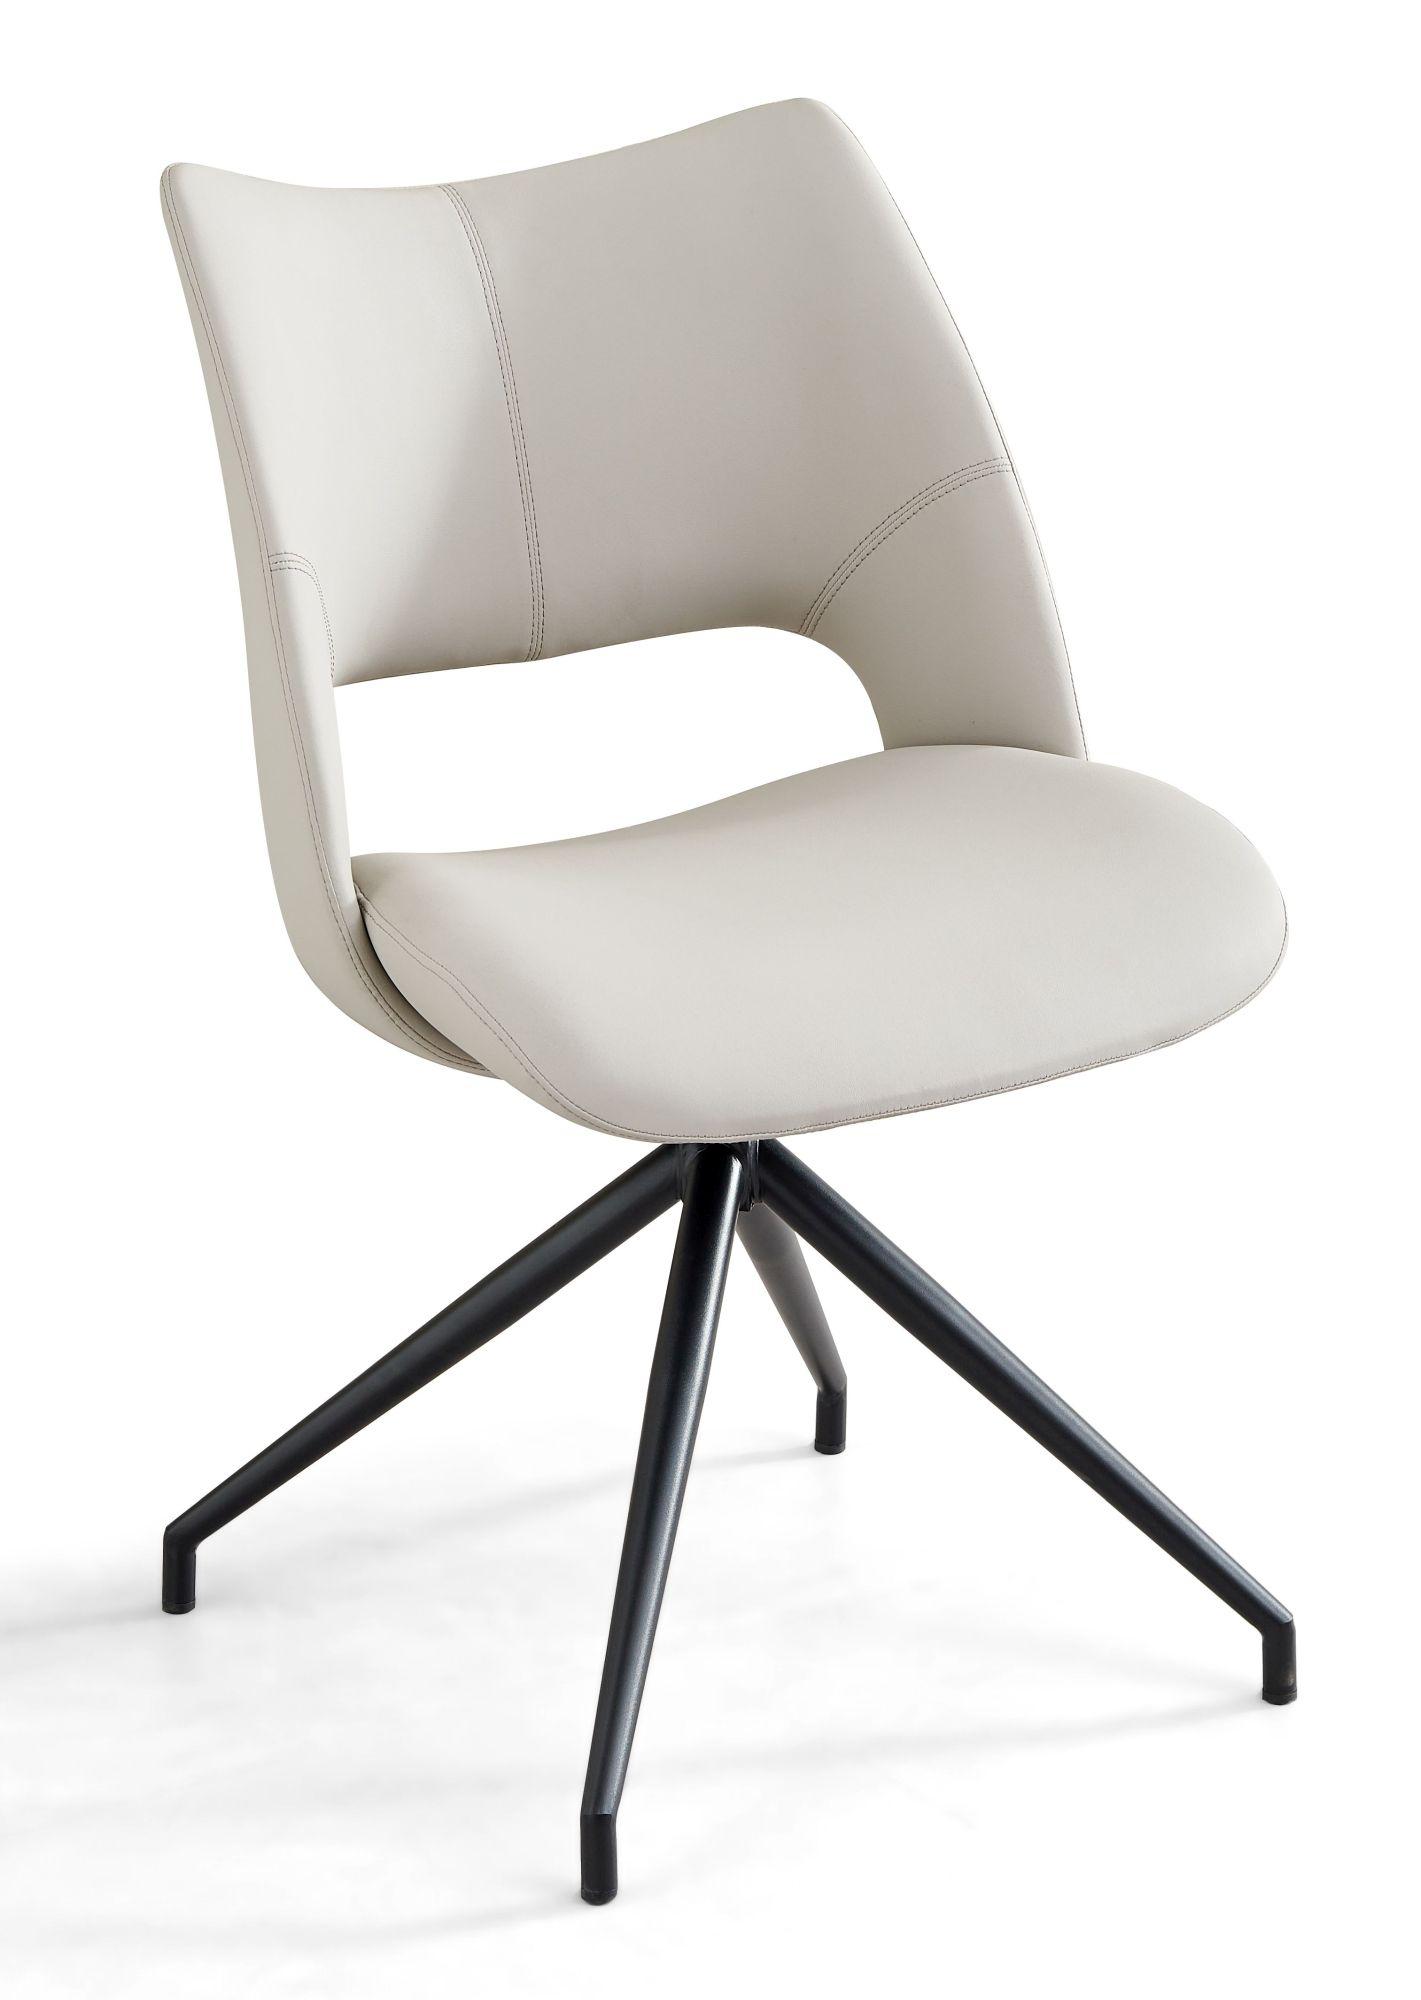 Lisbon Light Grey Faux Leather Swivel Dining Chair with Black Legs